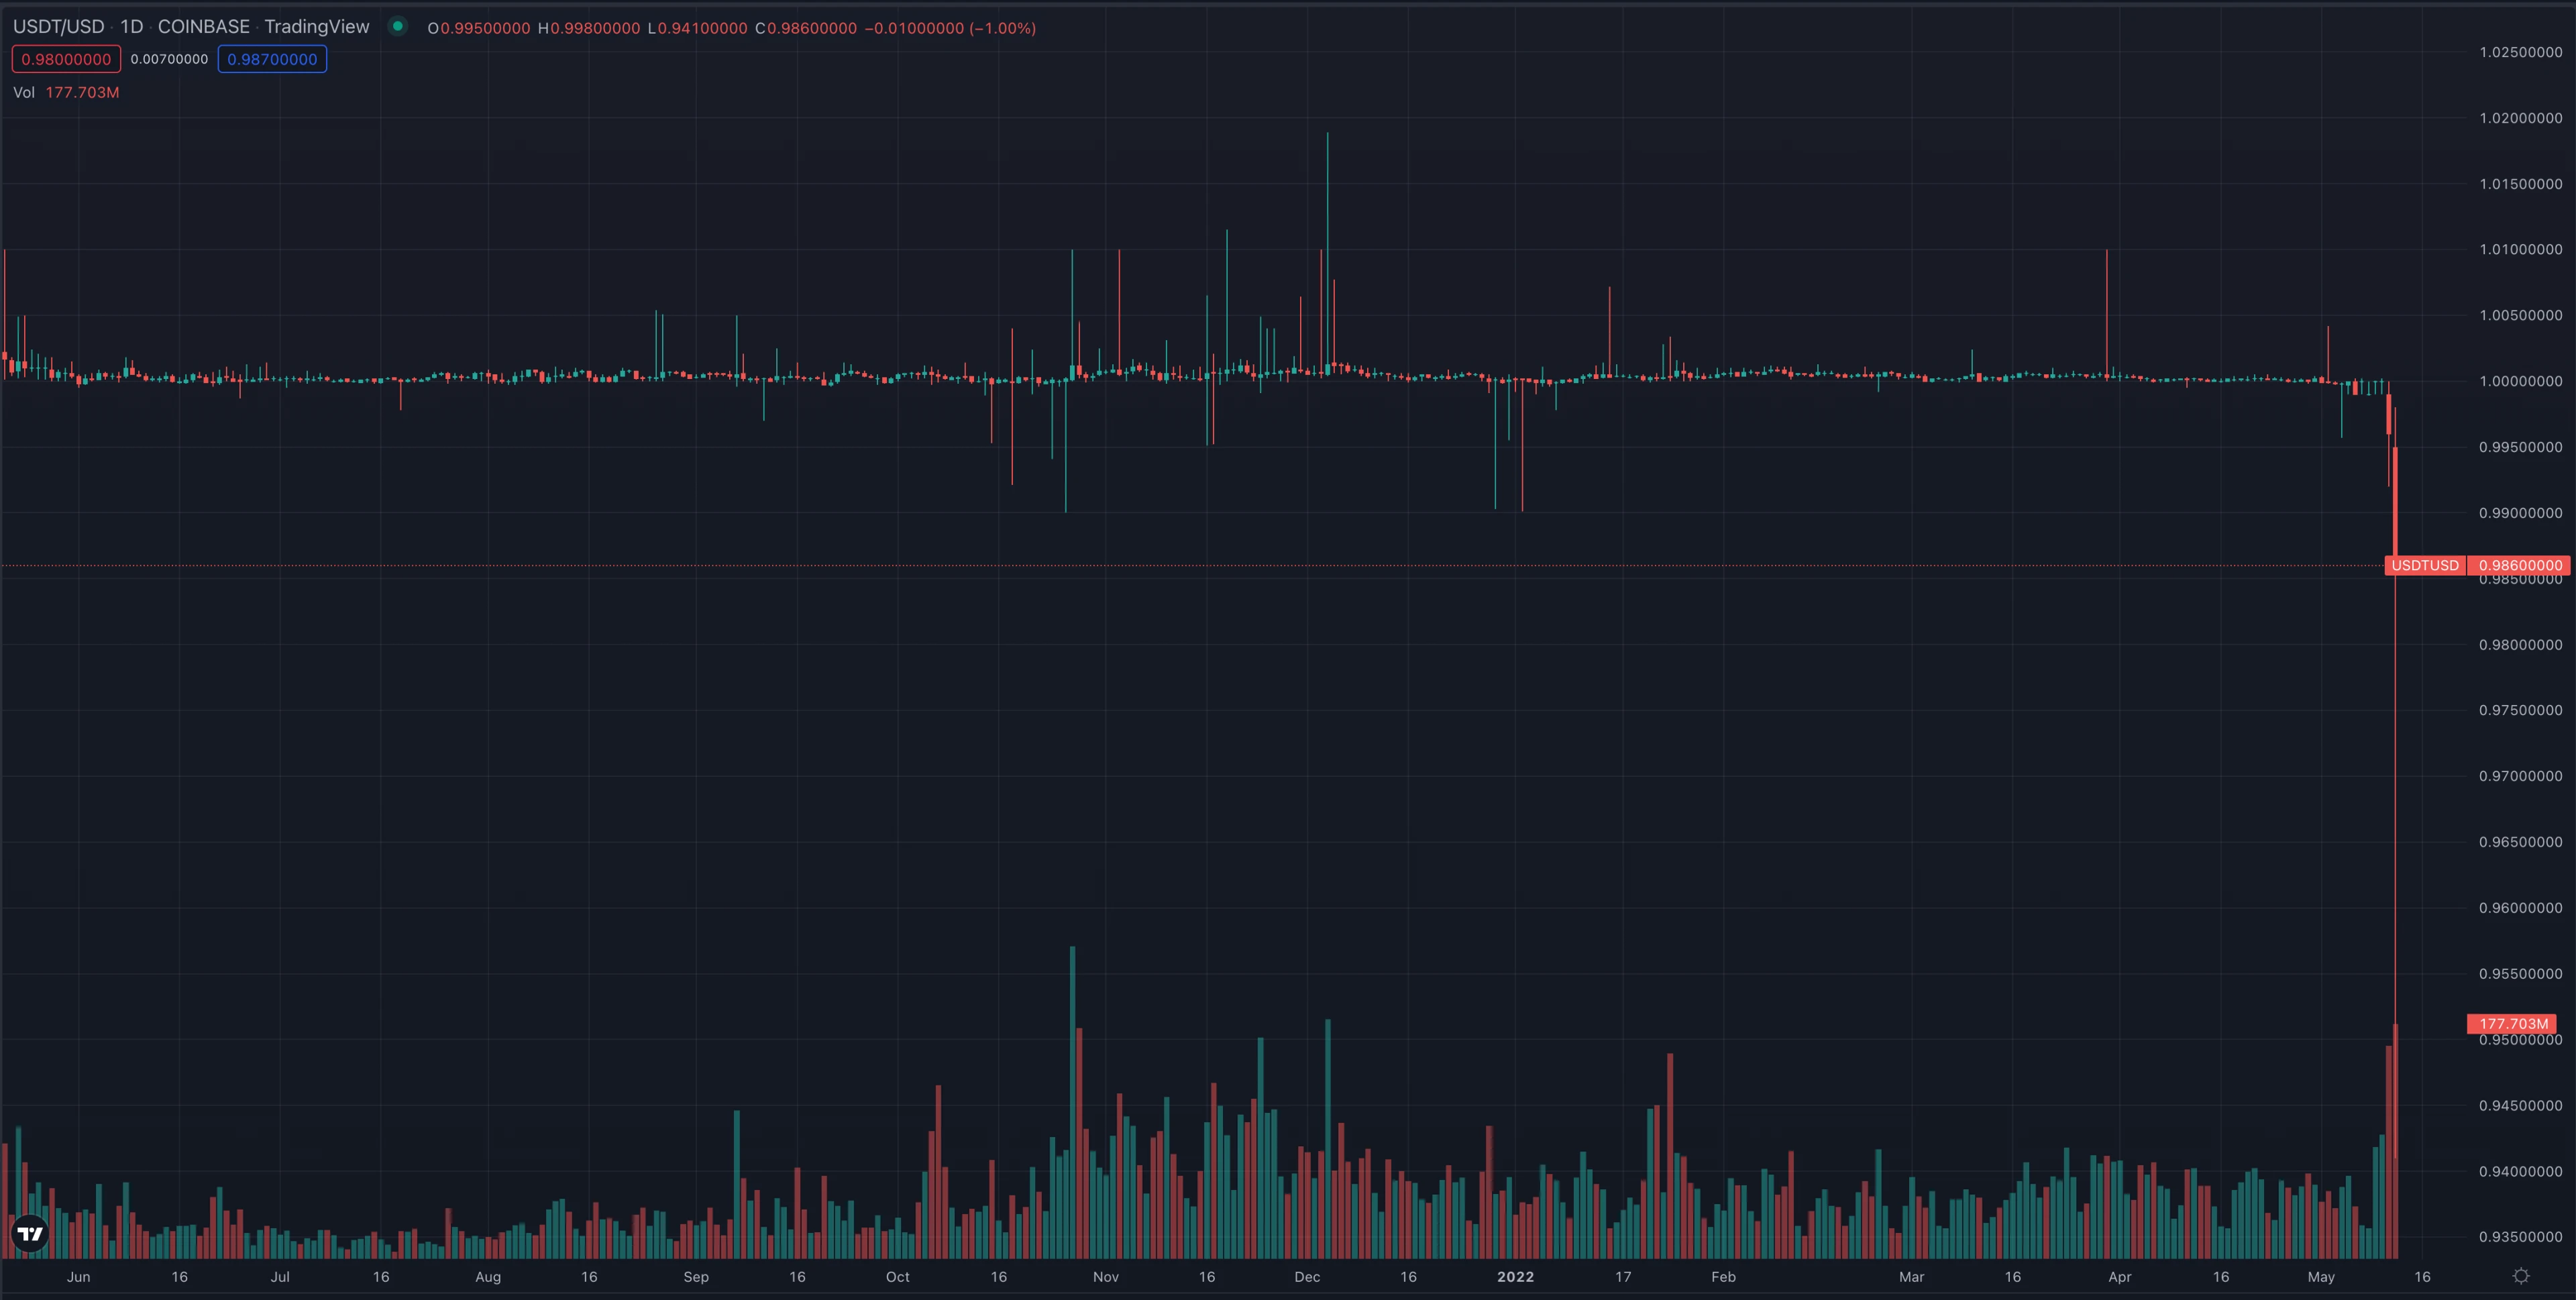 The candle chart featuring Tether's brief depeg. Source: Tradingview